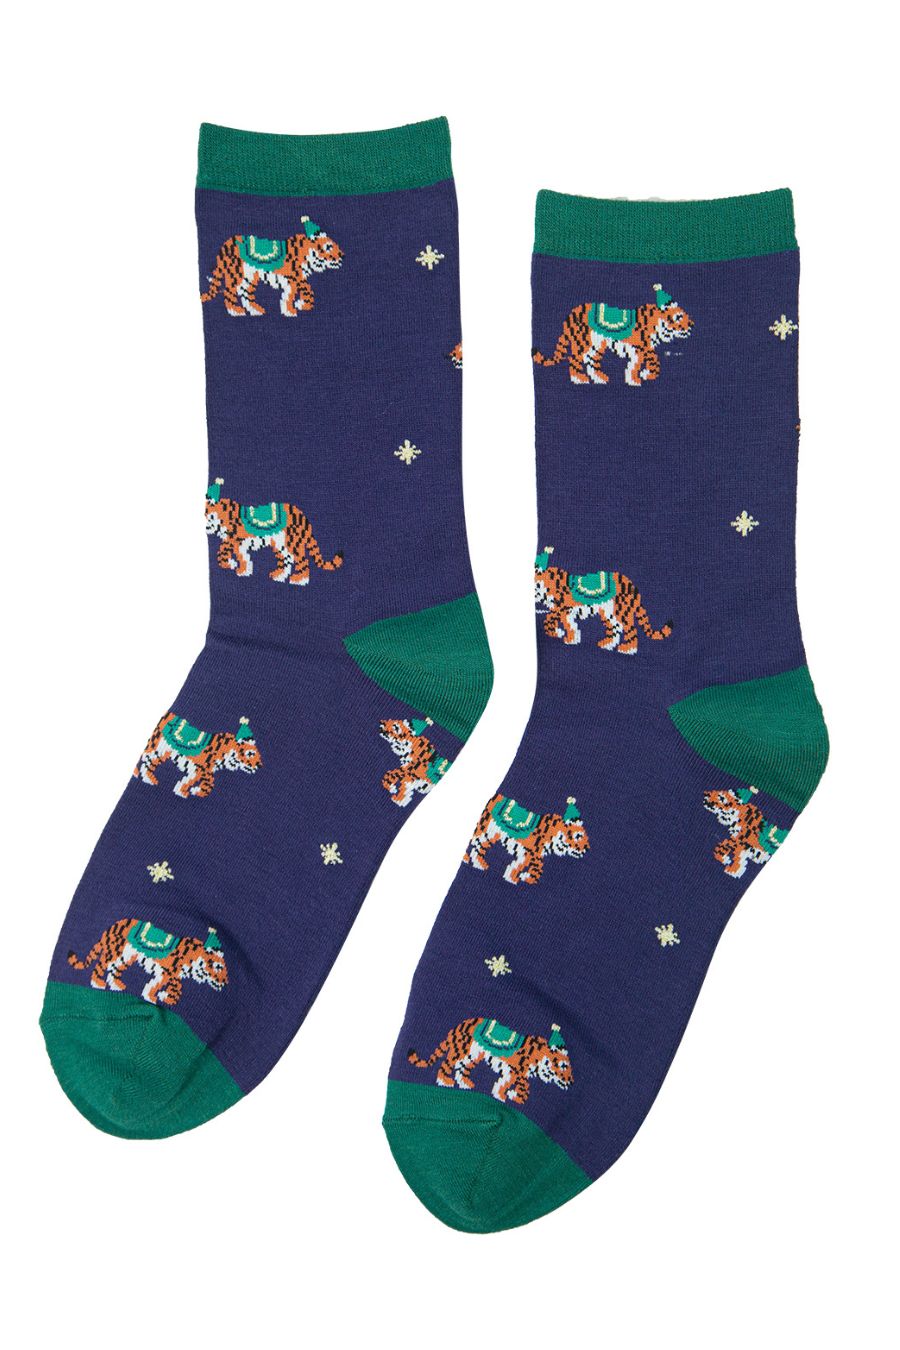 navy blue ankle socks with green toe, heel and trim, featuring tigers